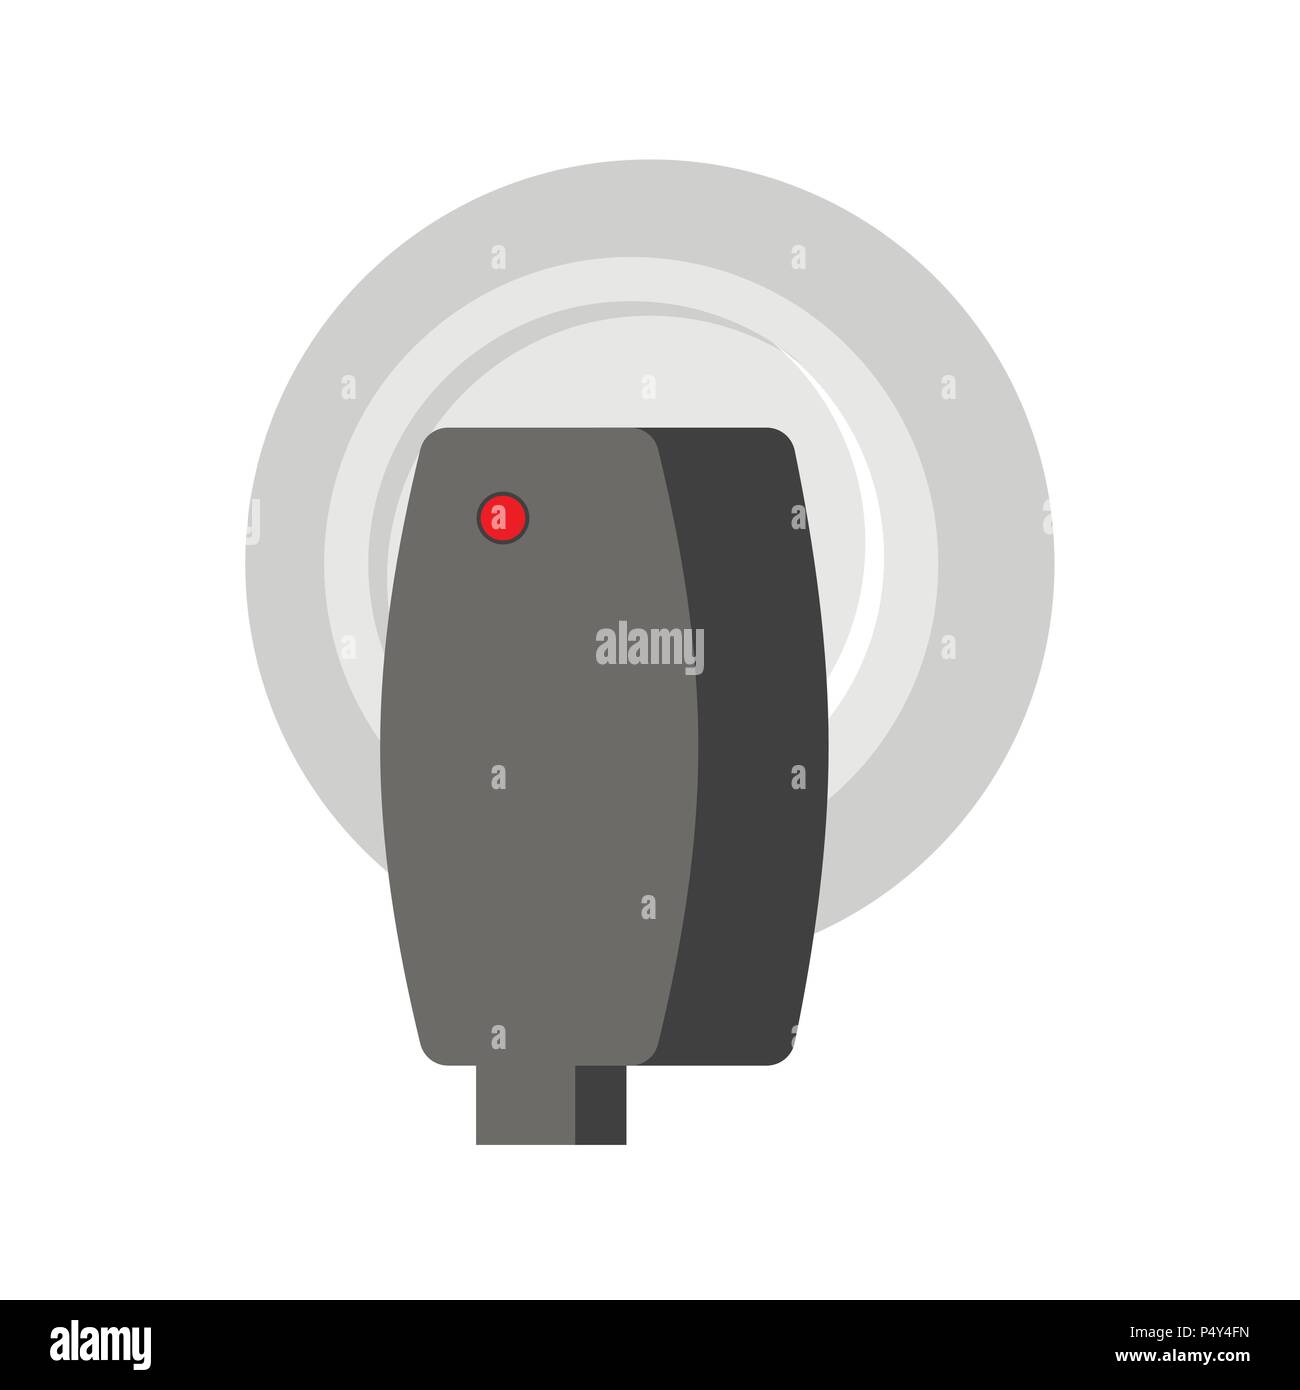 Charger in socket isolated. charging Vector illustration Stock Vector